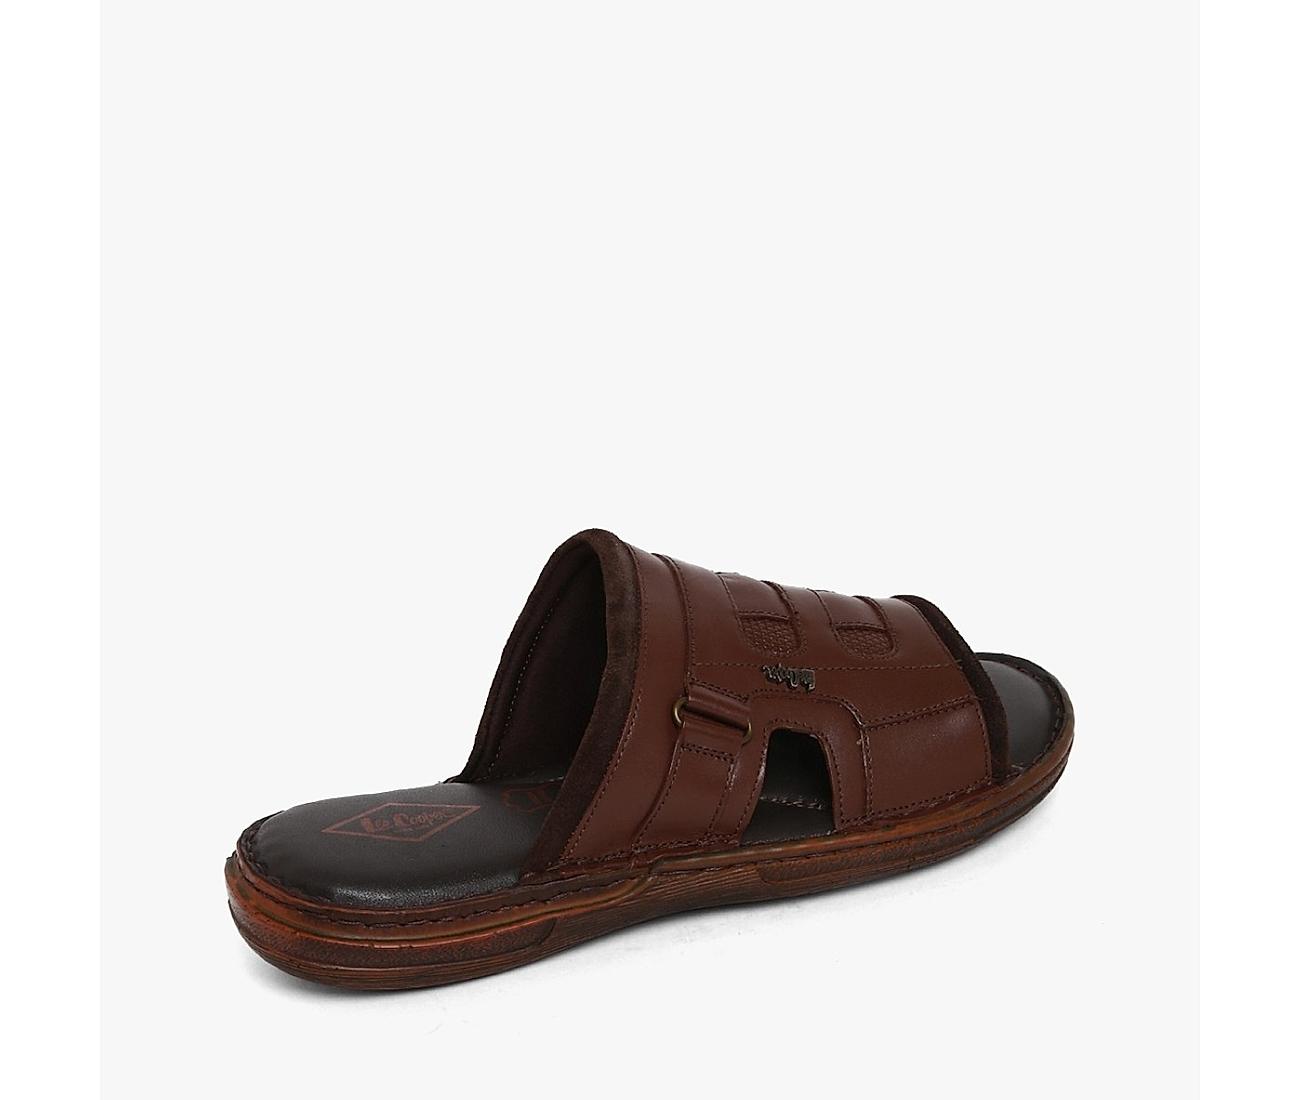 Original Classic - Lee Cooper Leather Sandal (Brown) - OCM0004-0421 Code:  OCM0004-0421-BROWN These sandals are designed with comfortably padded  insole and super-strong soles. This allows you to walk easily, even on rocky